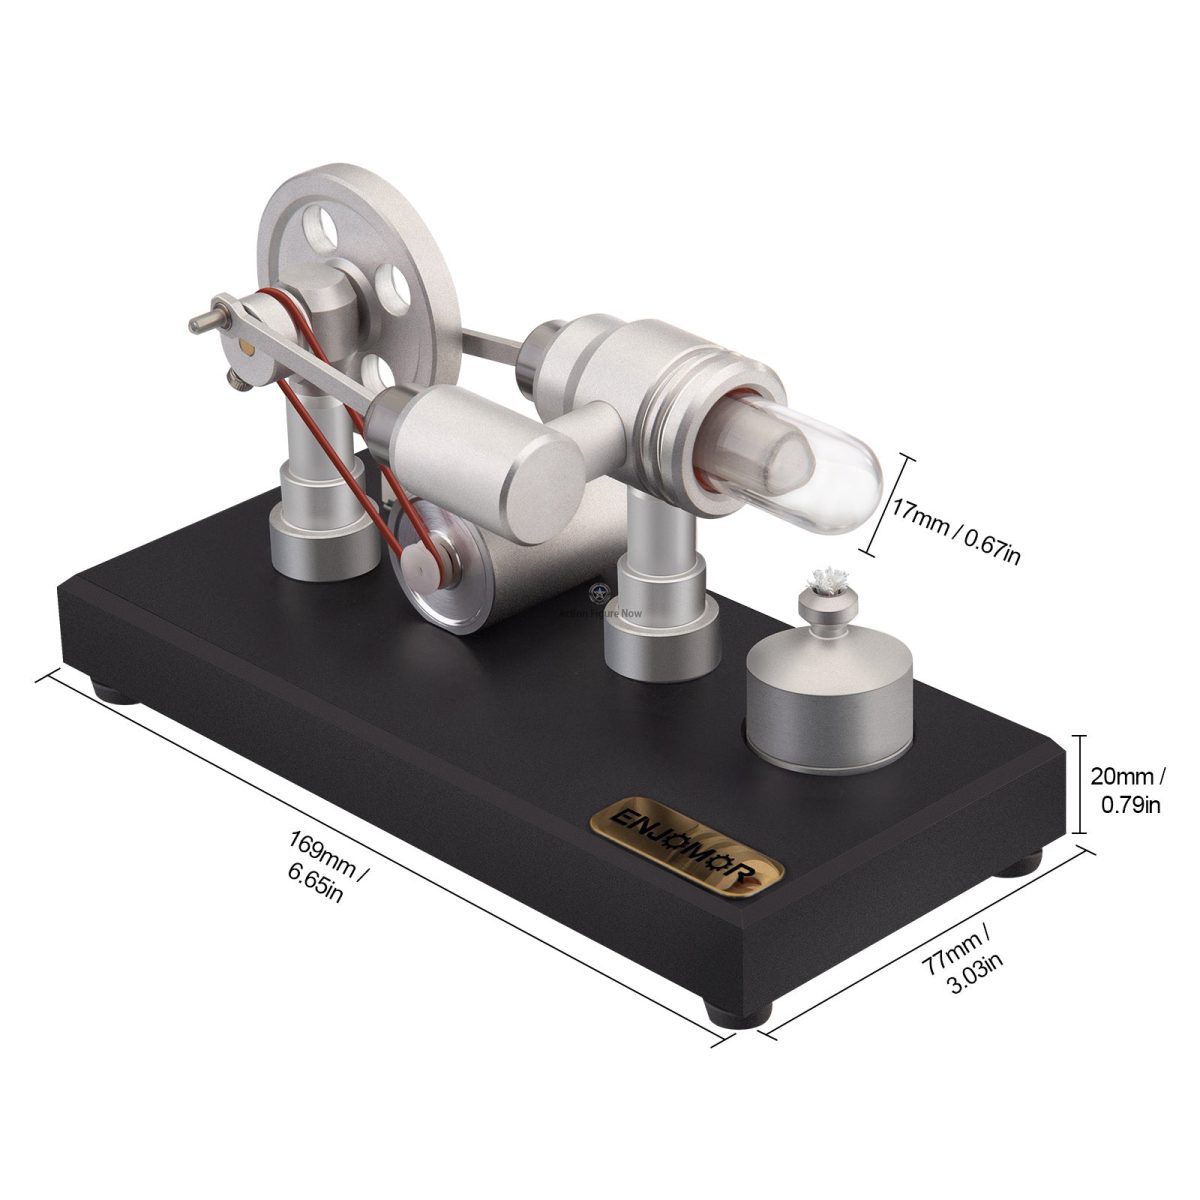 Gamma-Type Hot-Air Stirling Engine Model with LED Lights, Voltage Display, and Digital Features